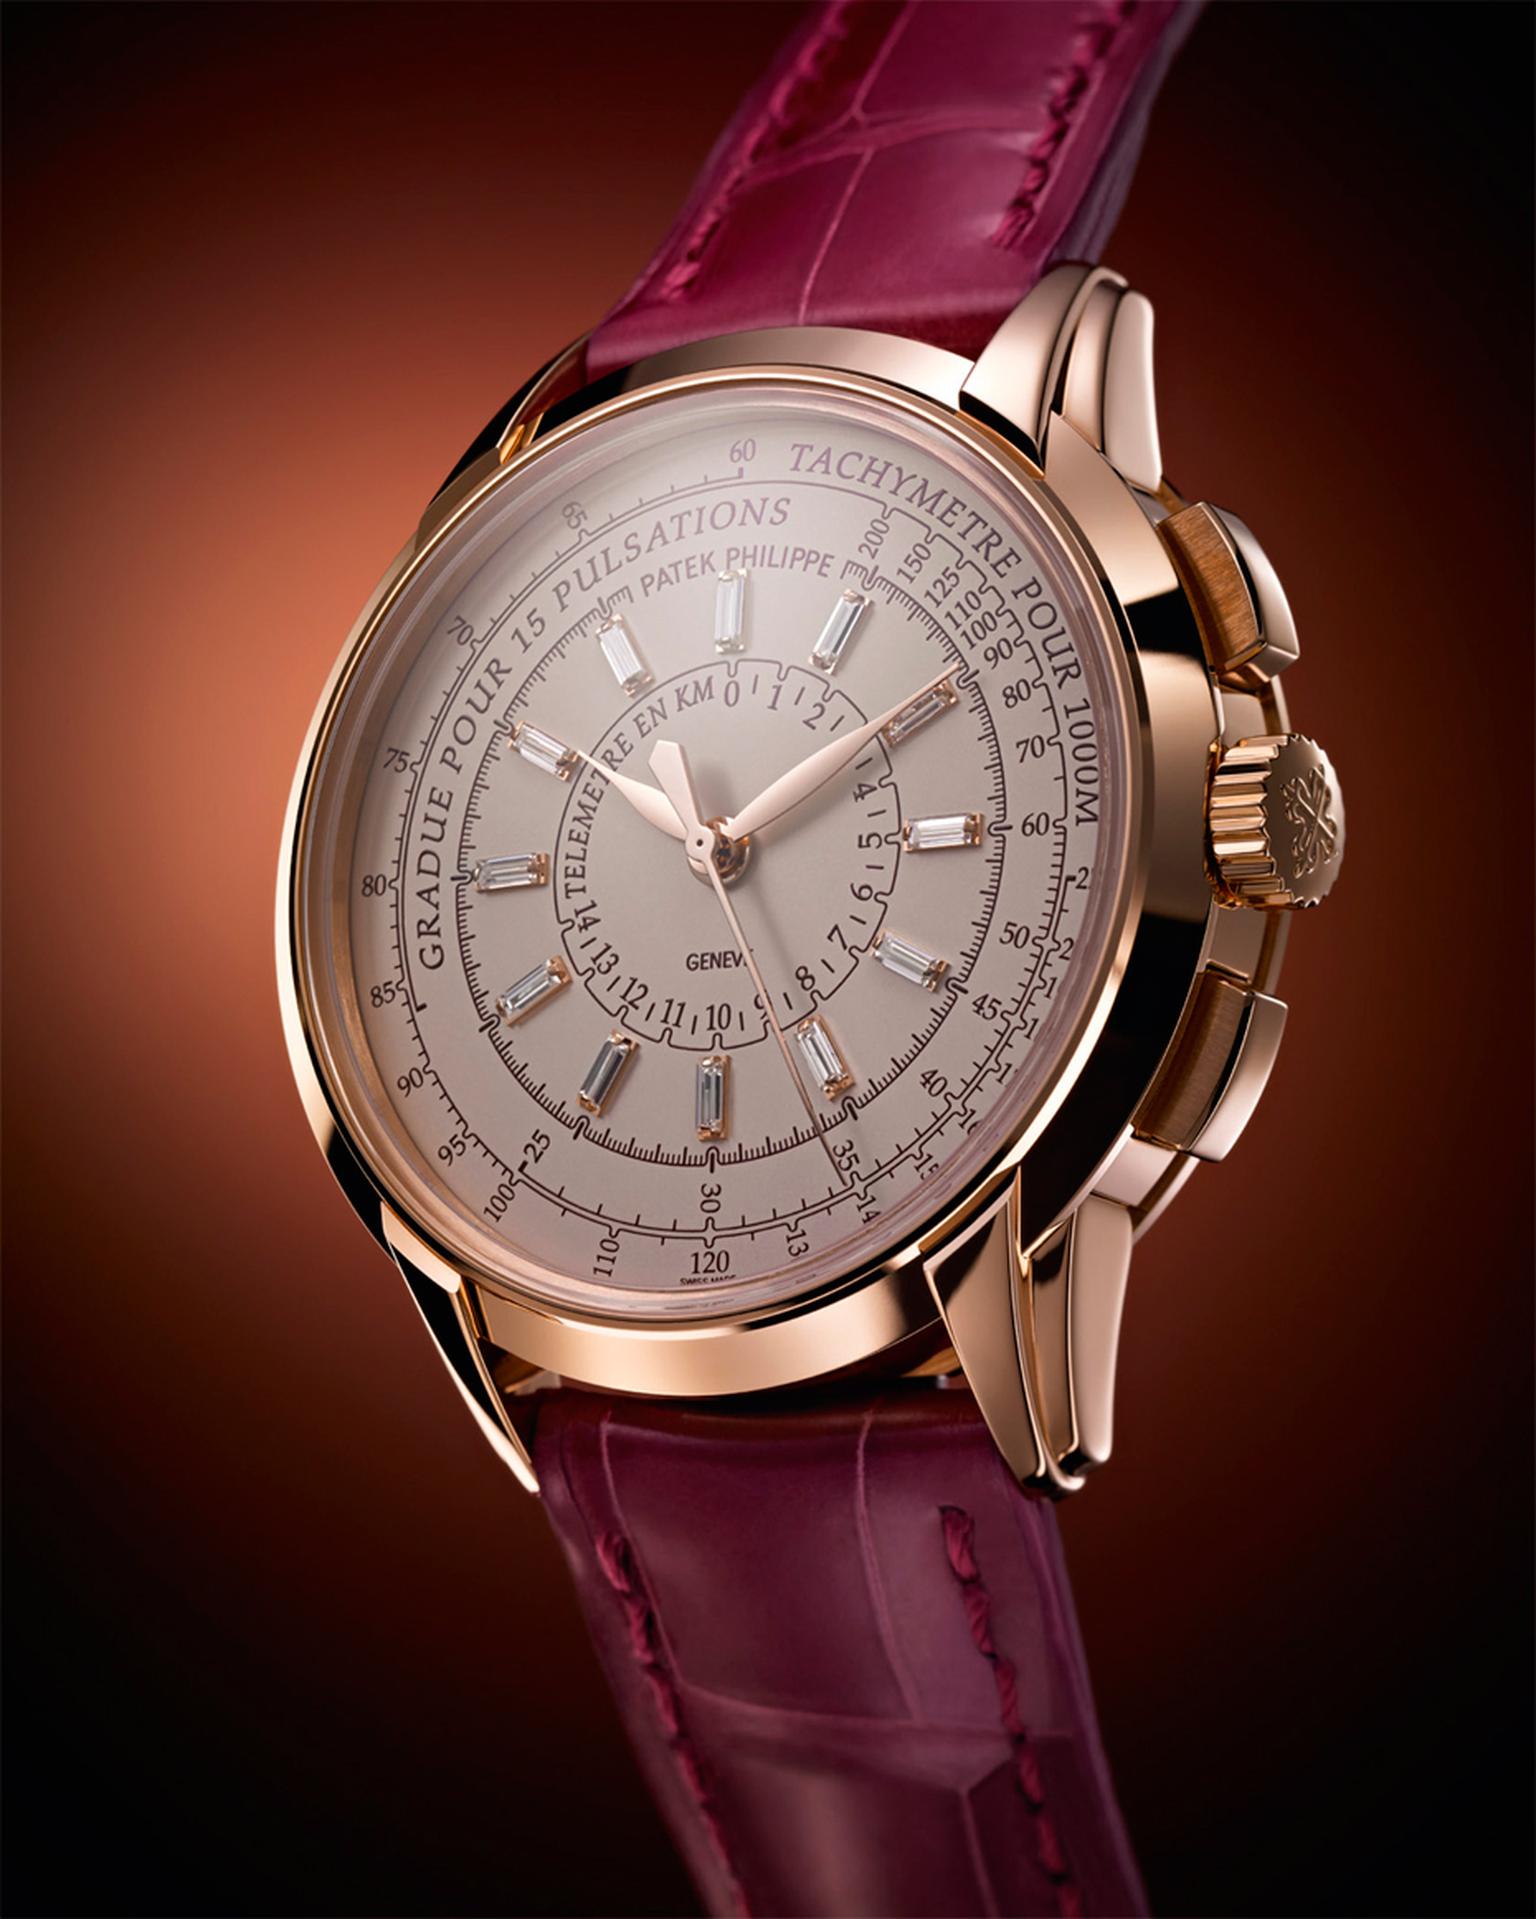 Patek Philippe Multi-Scale Chronograph Reference 4675 forms part of the 175th Anniversary collection and features three logarithmic scales that can be used to compute speed via a tachymeter, distance with a telemeter and heartbeats per minute with a pulso